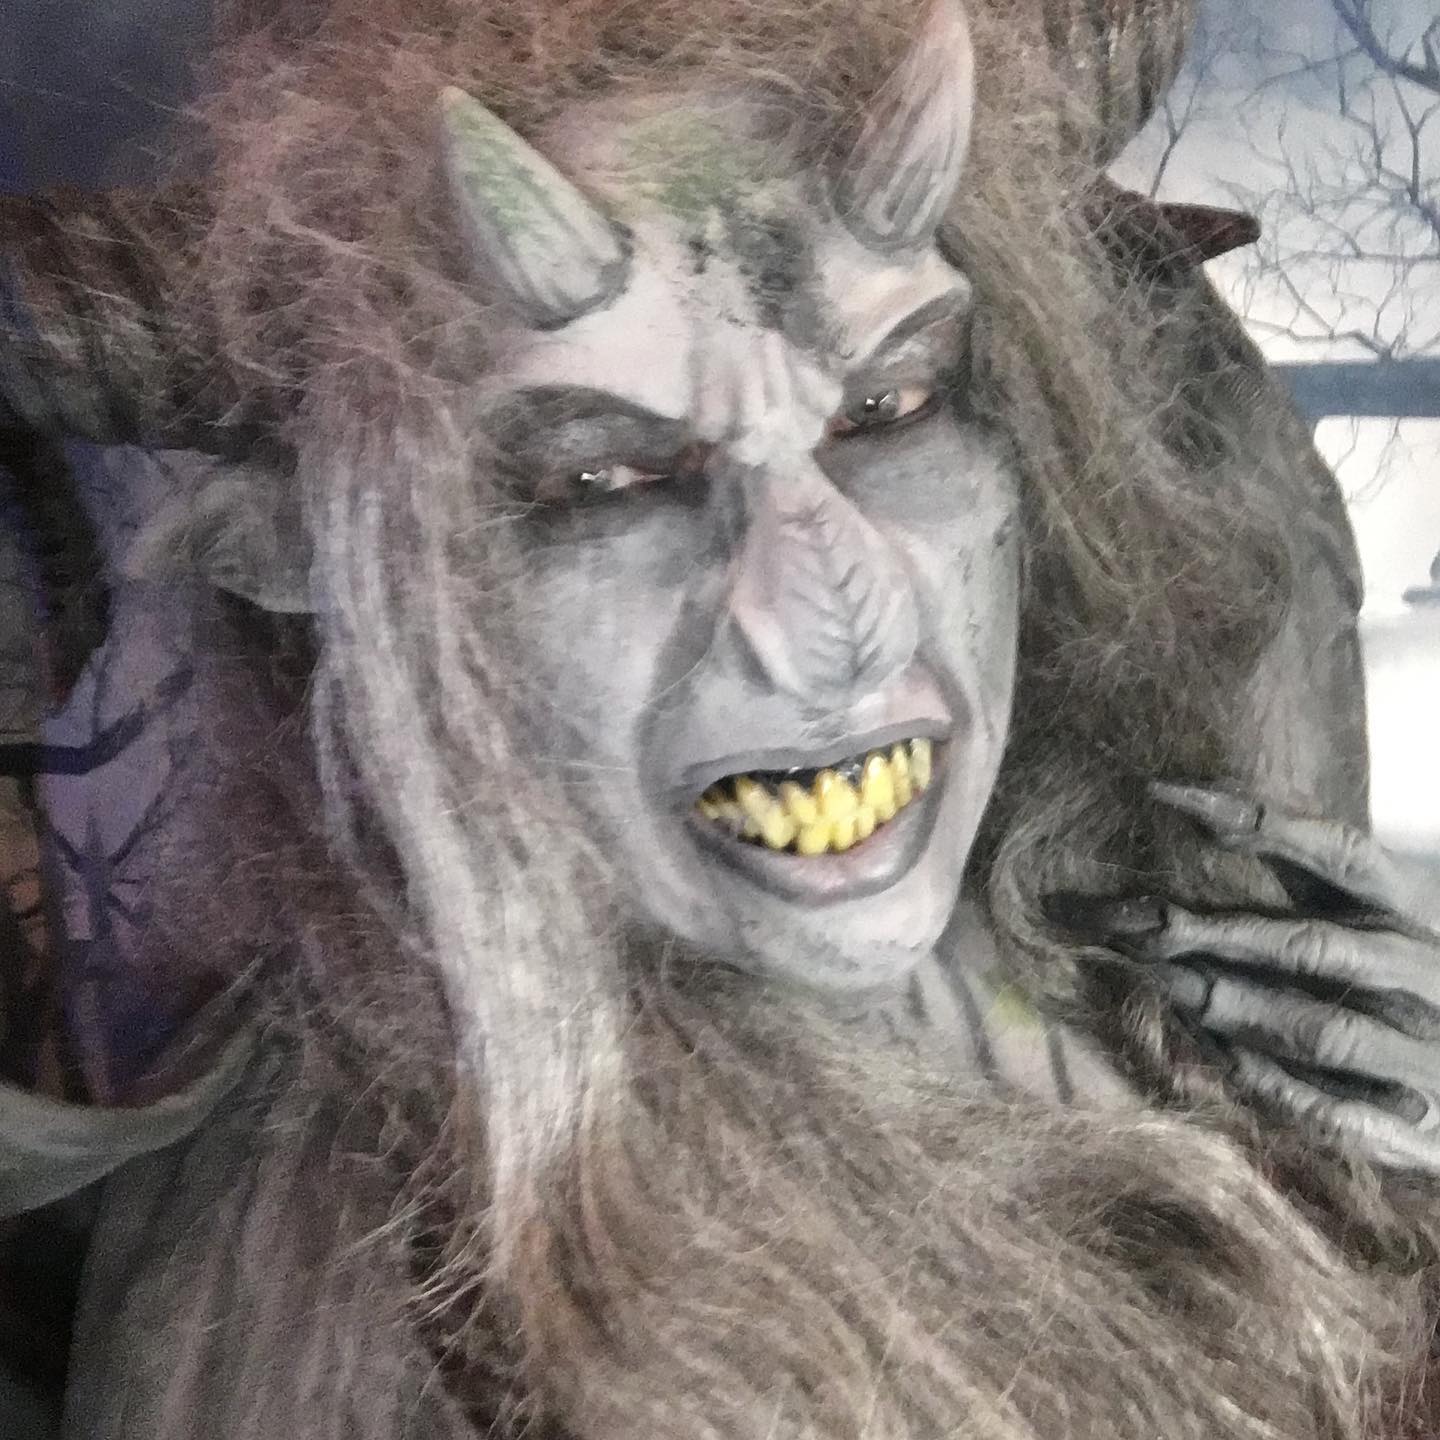 Honorable Mention in Gargoyle Instagram Makeup Challenge judged by